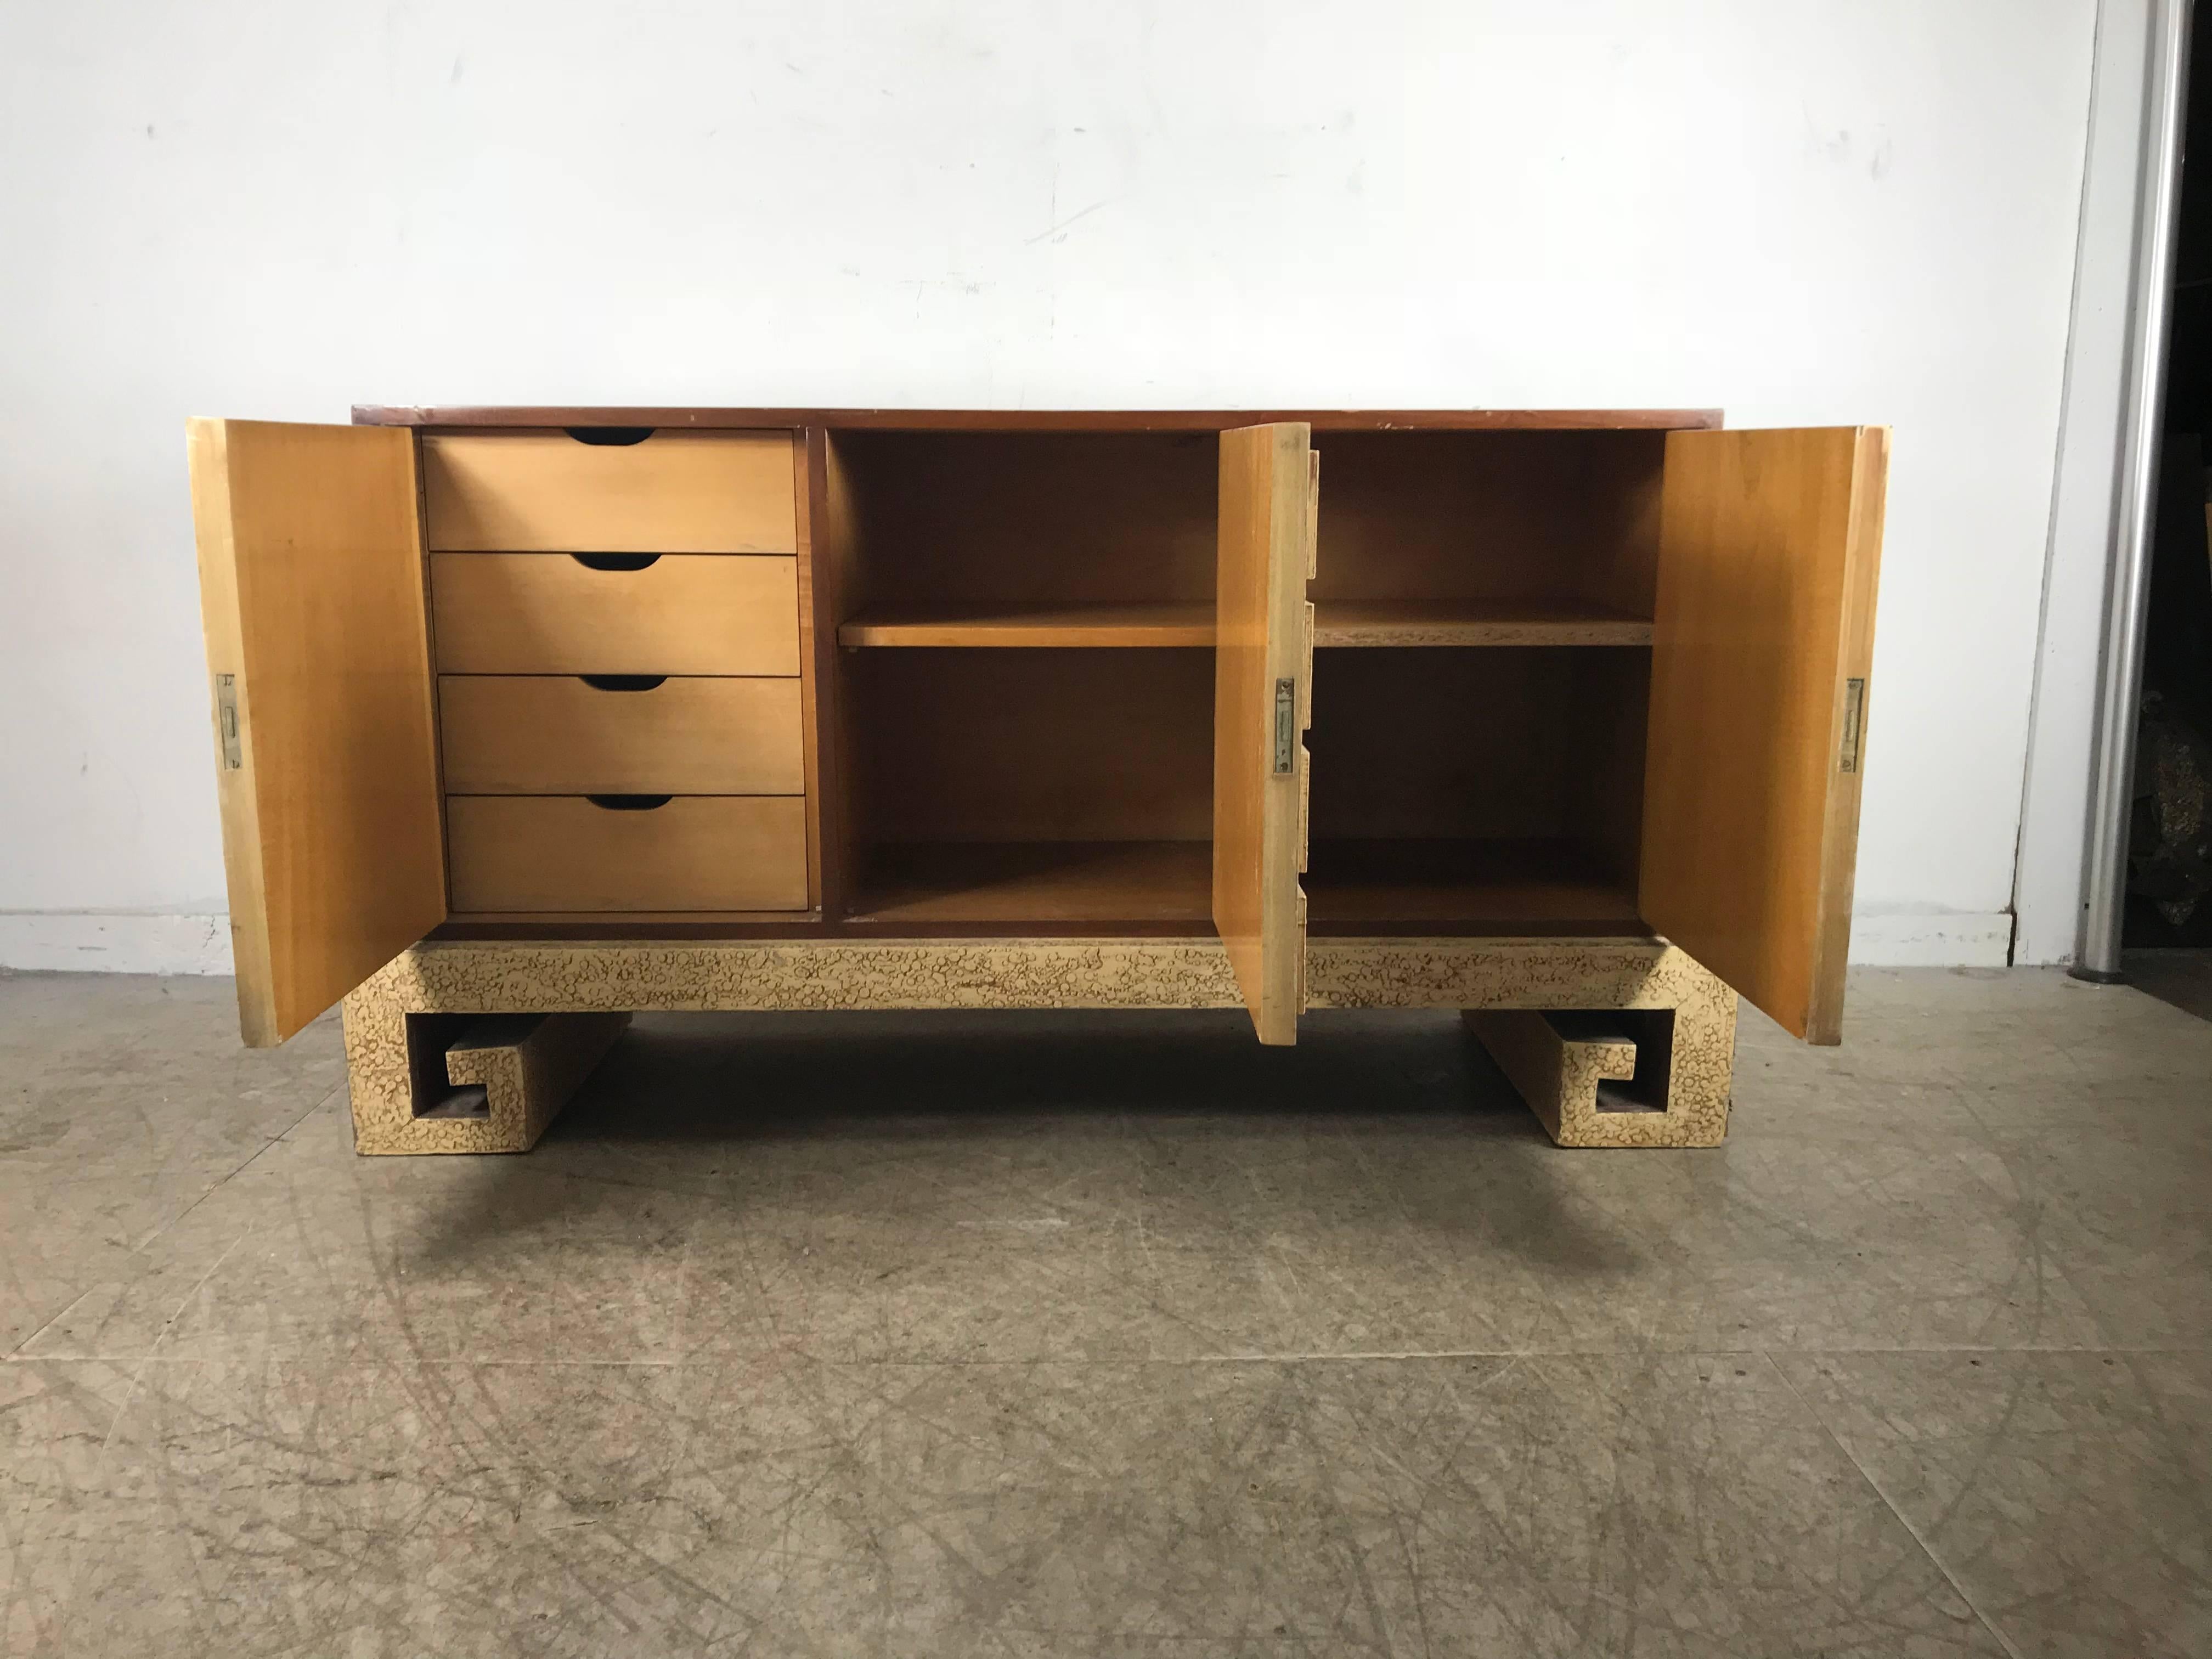 Stunning modernist Server, credenza manner of James Mont.. An Asian inspired server with carved fret work and textured oil spot lacquer surface, walnut top and surround, three doors and four drawers, hand delivery avail to New York City or anywhere